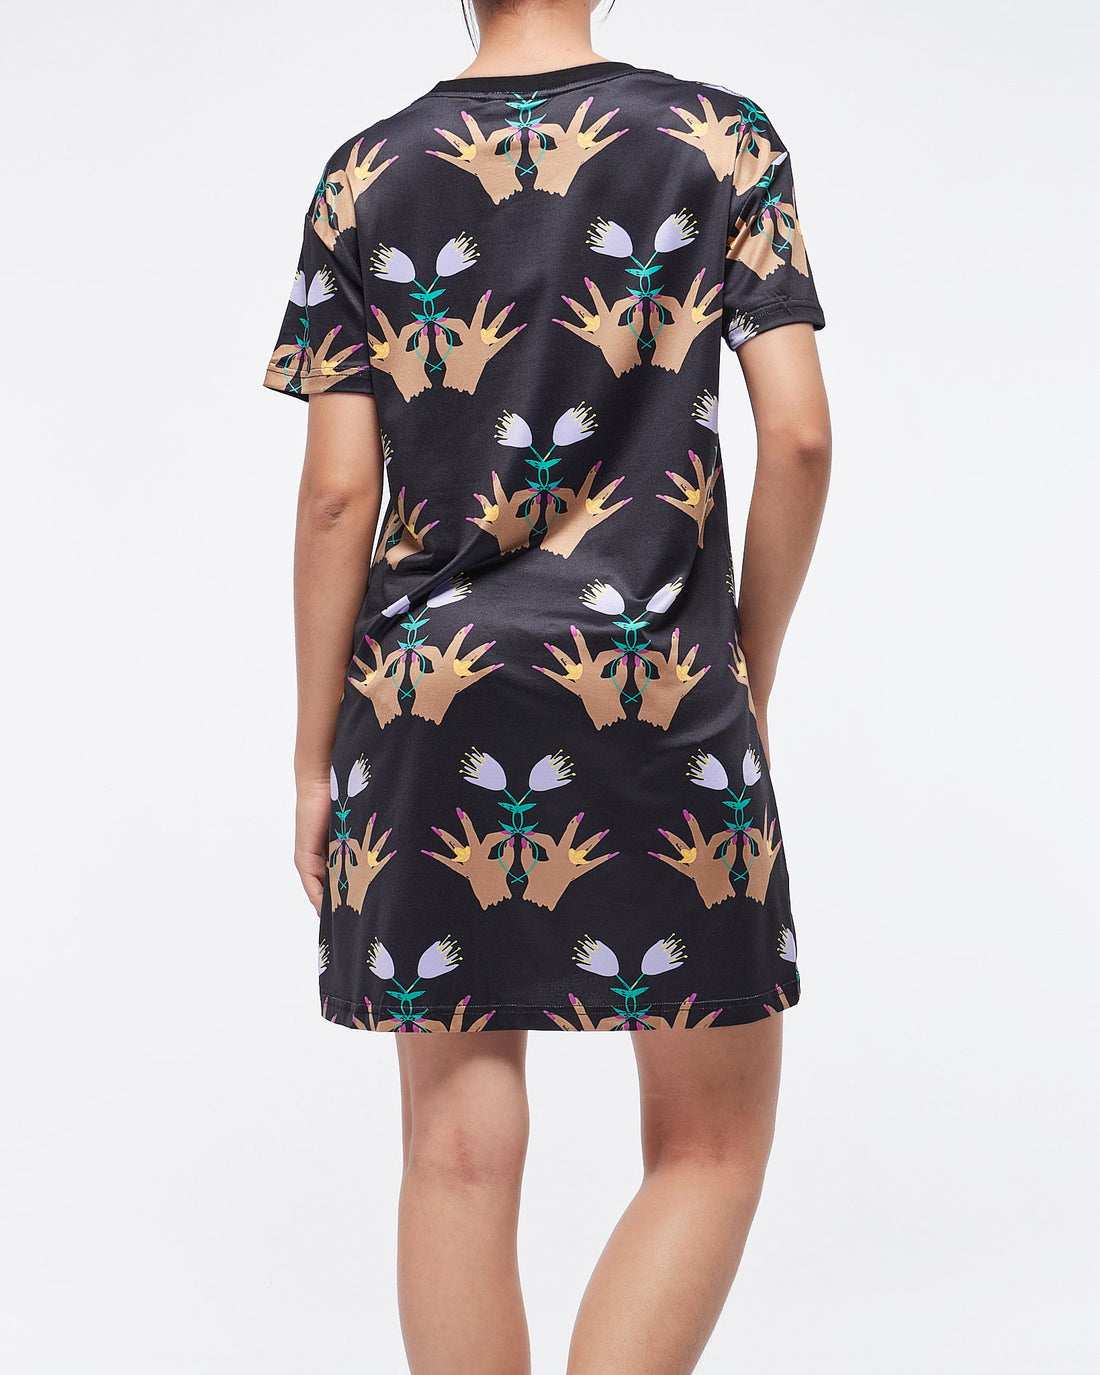 MOI OUTFIT-AD Floral Over Printed Lady T-Shirt Dress 22.90